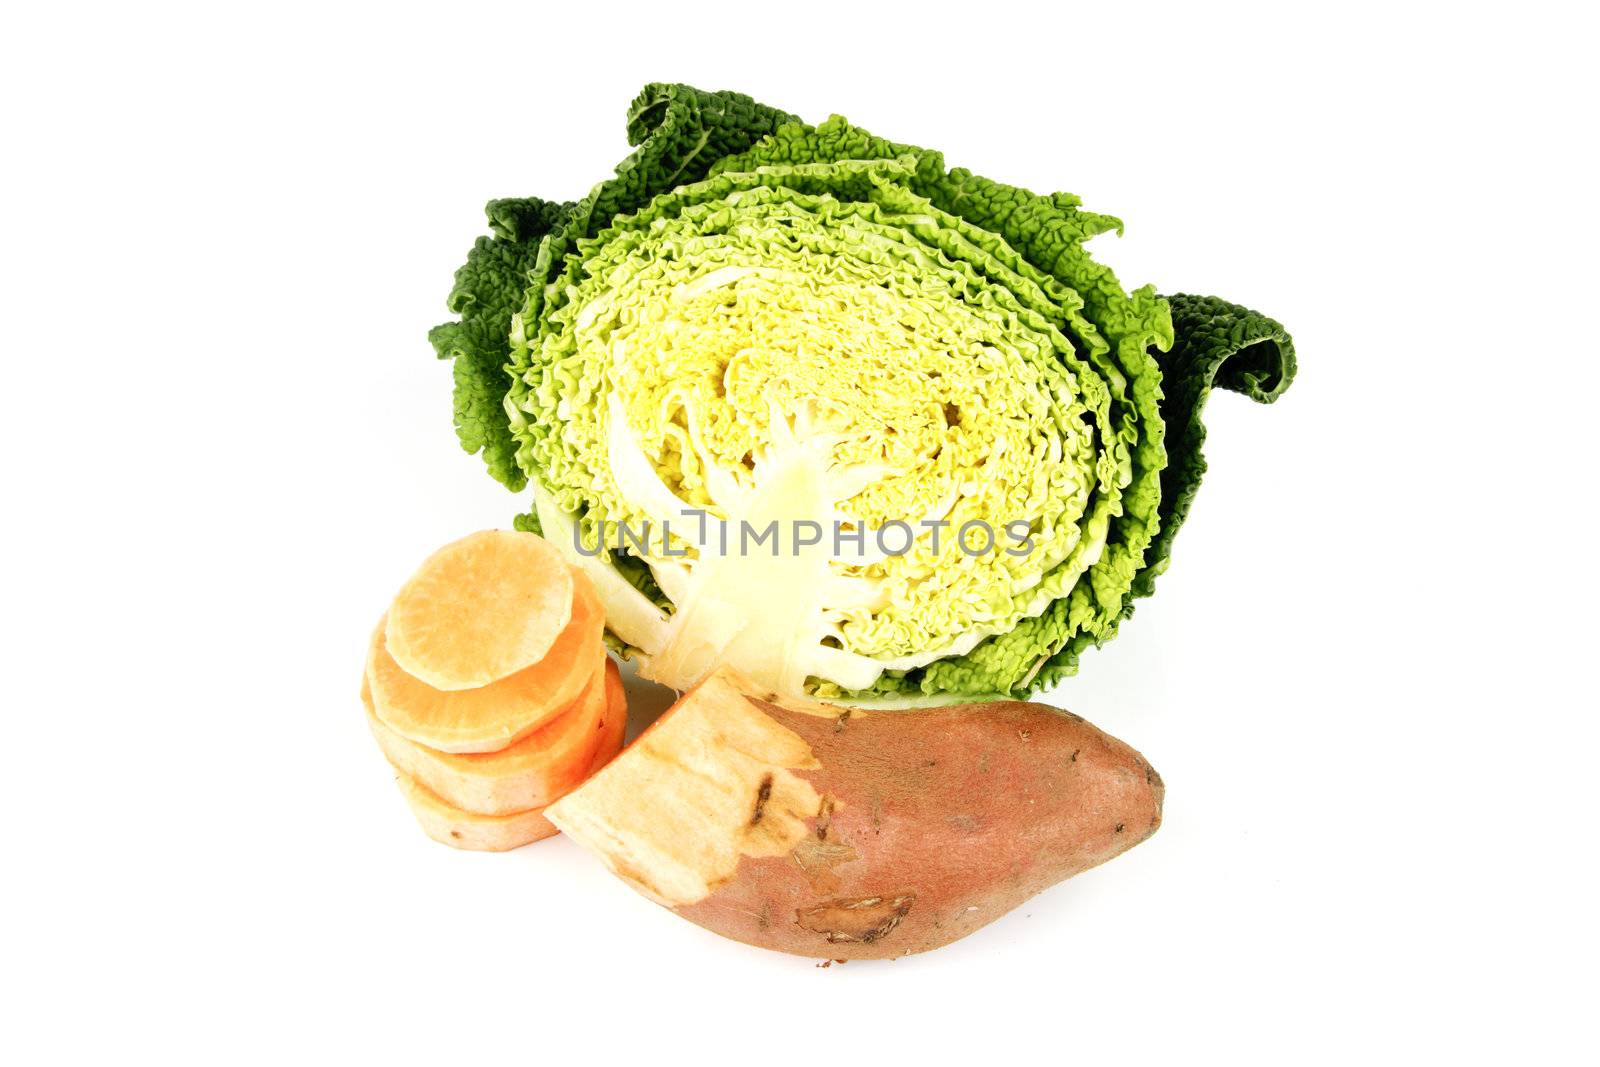 Half a raw green cabbage with half a sweet potato and slices on a reflective white background